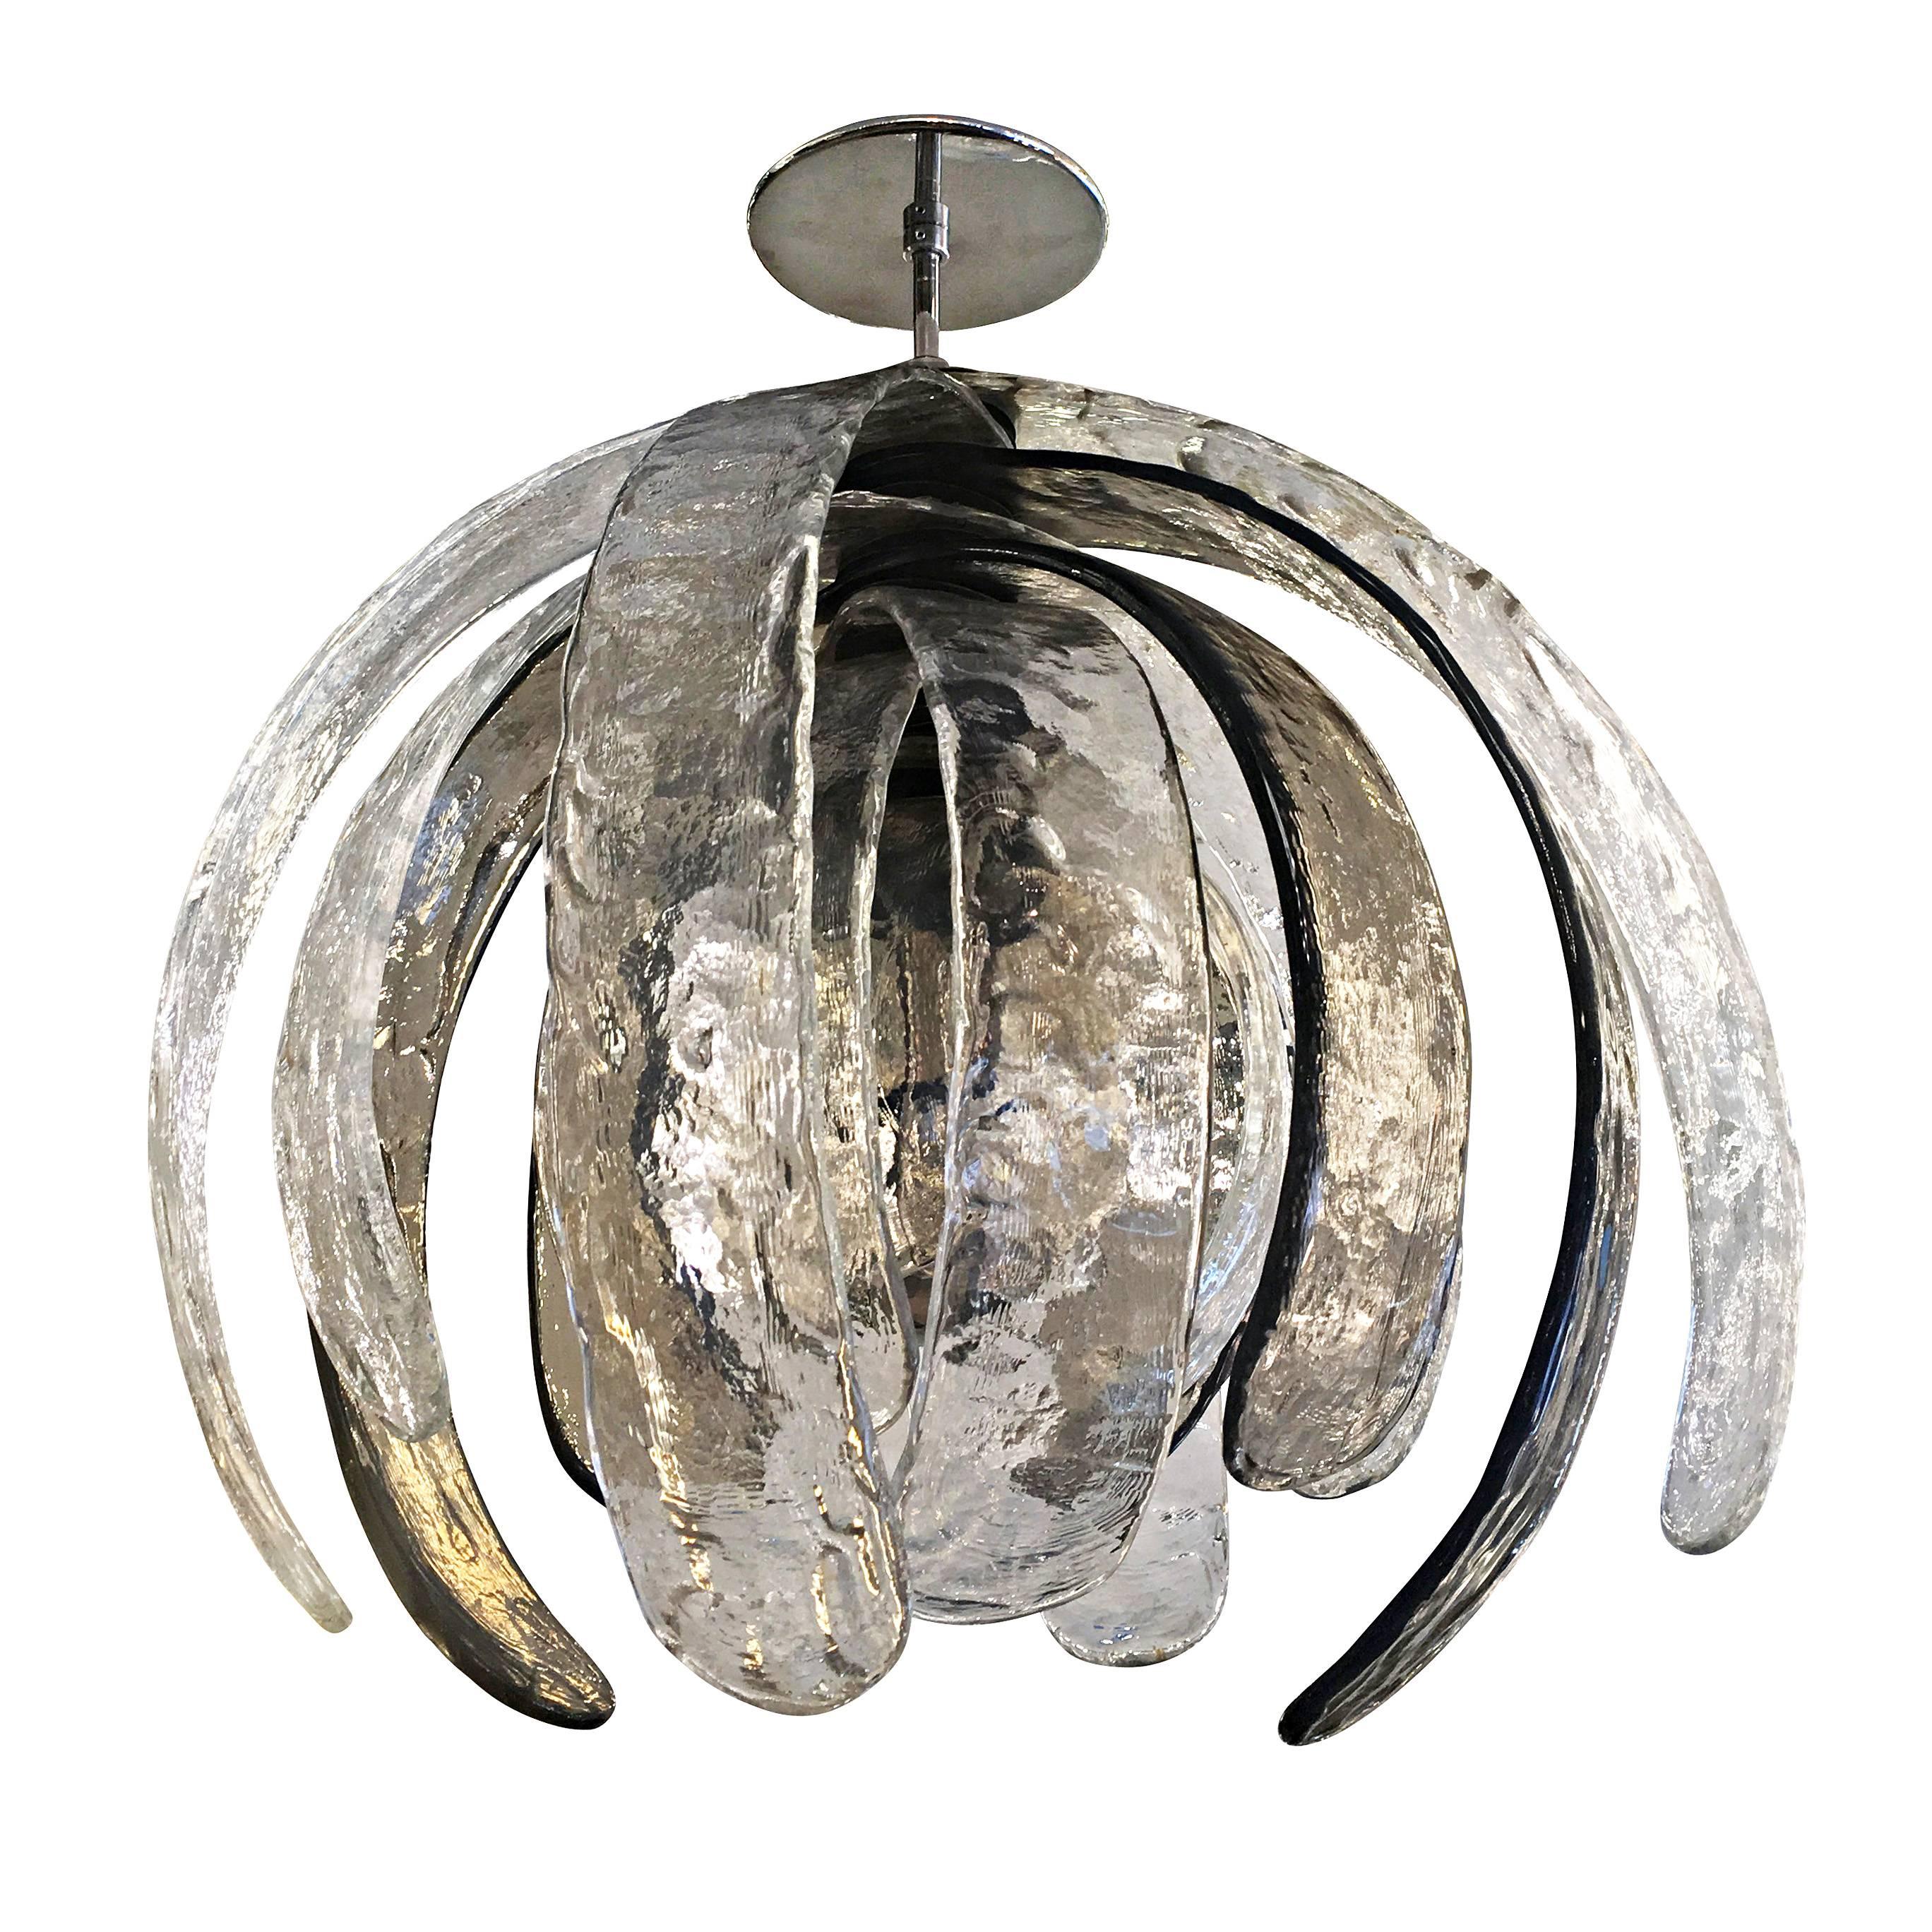 Sculptural Murano glass chandelier designed by Carlo Nason for Mazzega in the 1960s. Its composed of eleven textured petal shaped glasses that can rotate around the center stem. Four of the glasses are a dark gray and seven are clear. Holds one